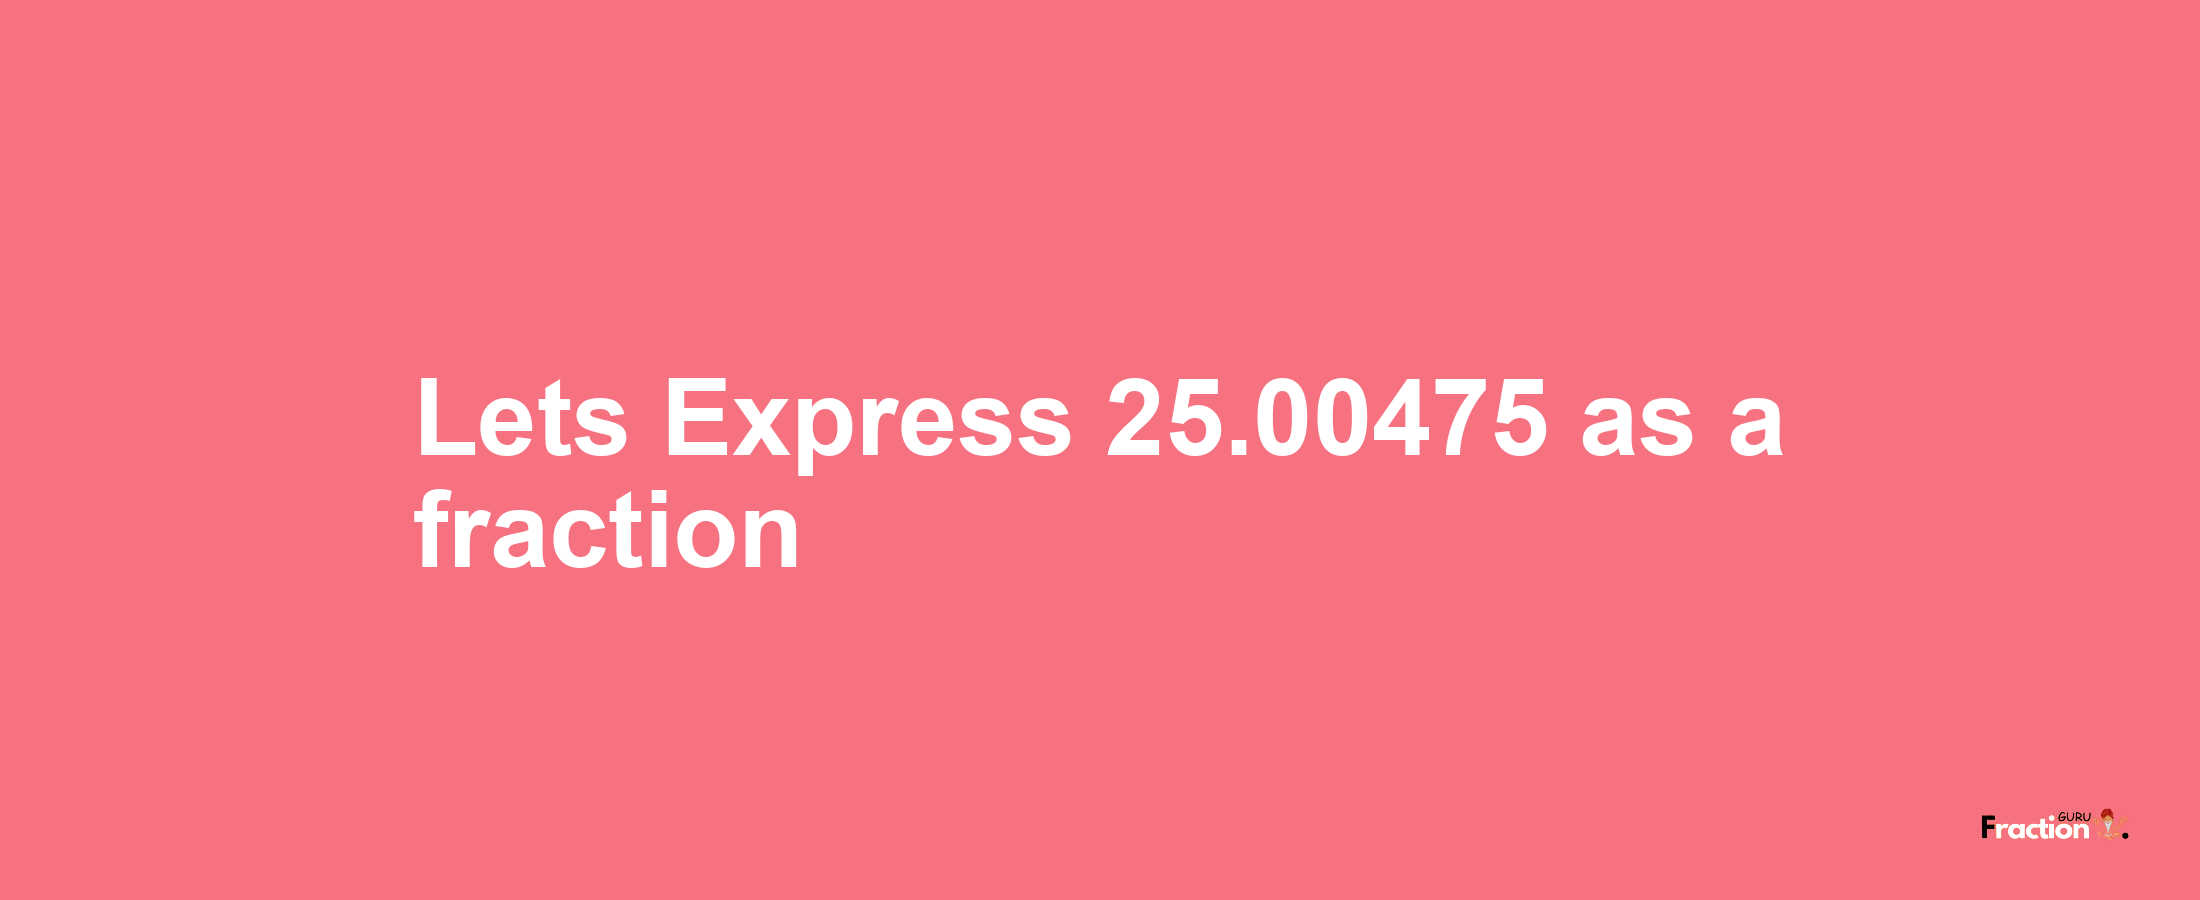 Lets Express 25.00475 as afraction